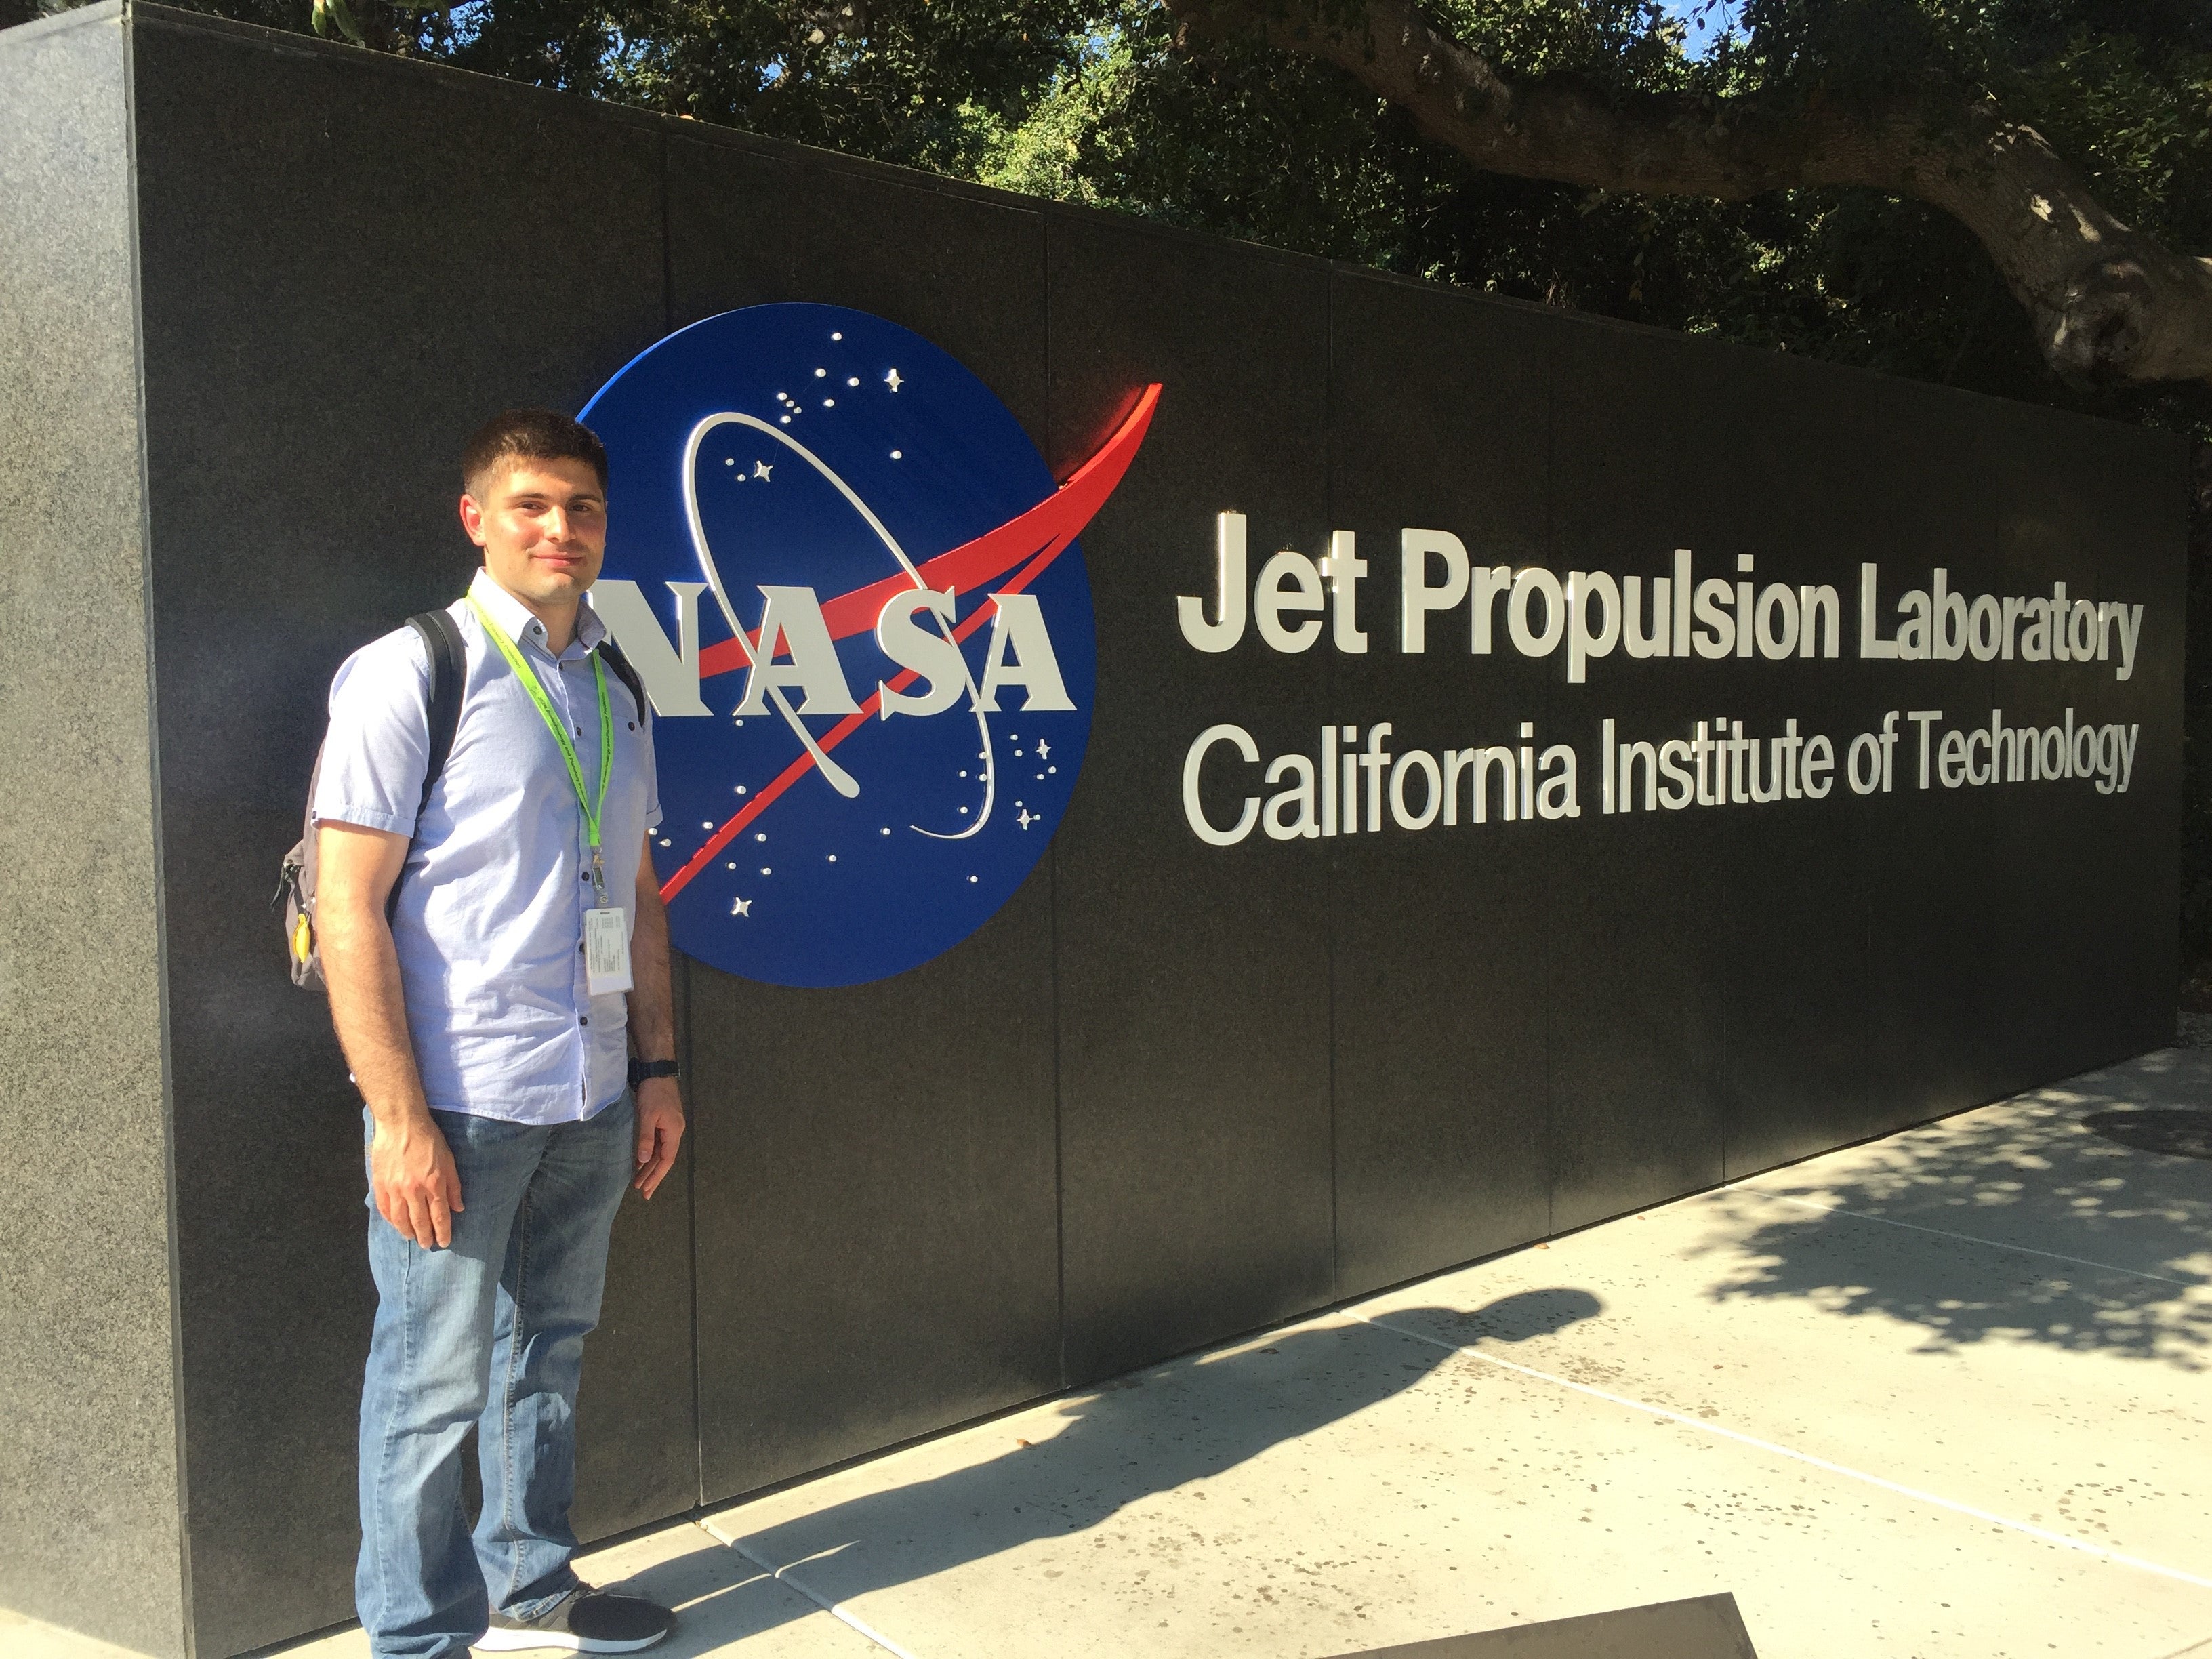 Ohannes smiles next to the NASA Jet Propulsion Labratory sign at the California Institute of Technology campus